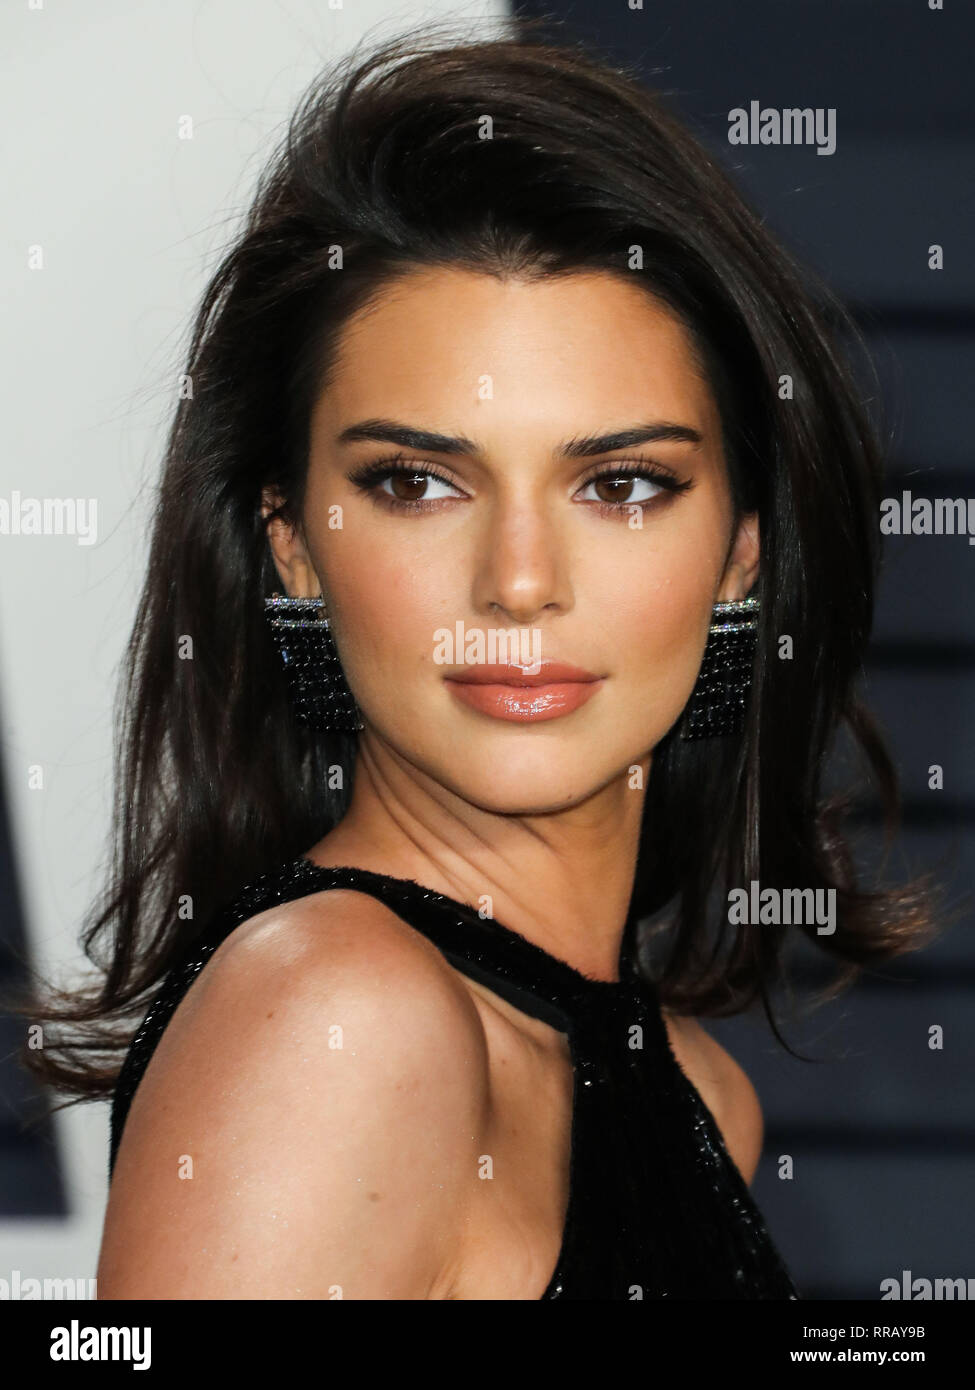 BEVERLY HILLS, LOS ANGELES, CA, USA - FEBRUARY 24: Model Kendall Jenner ...